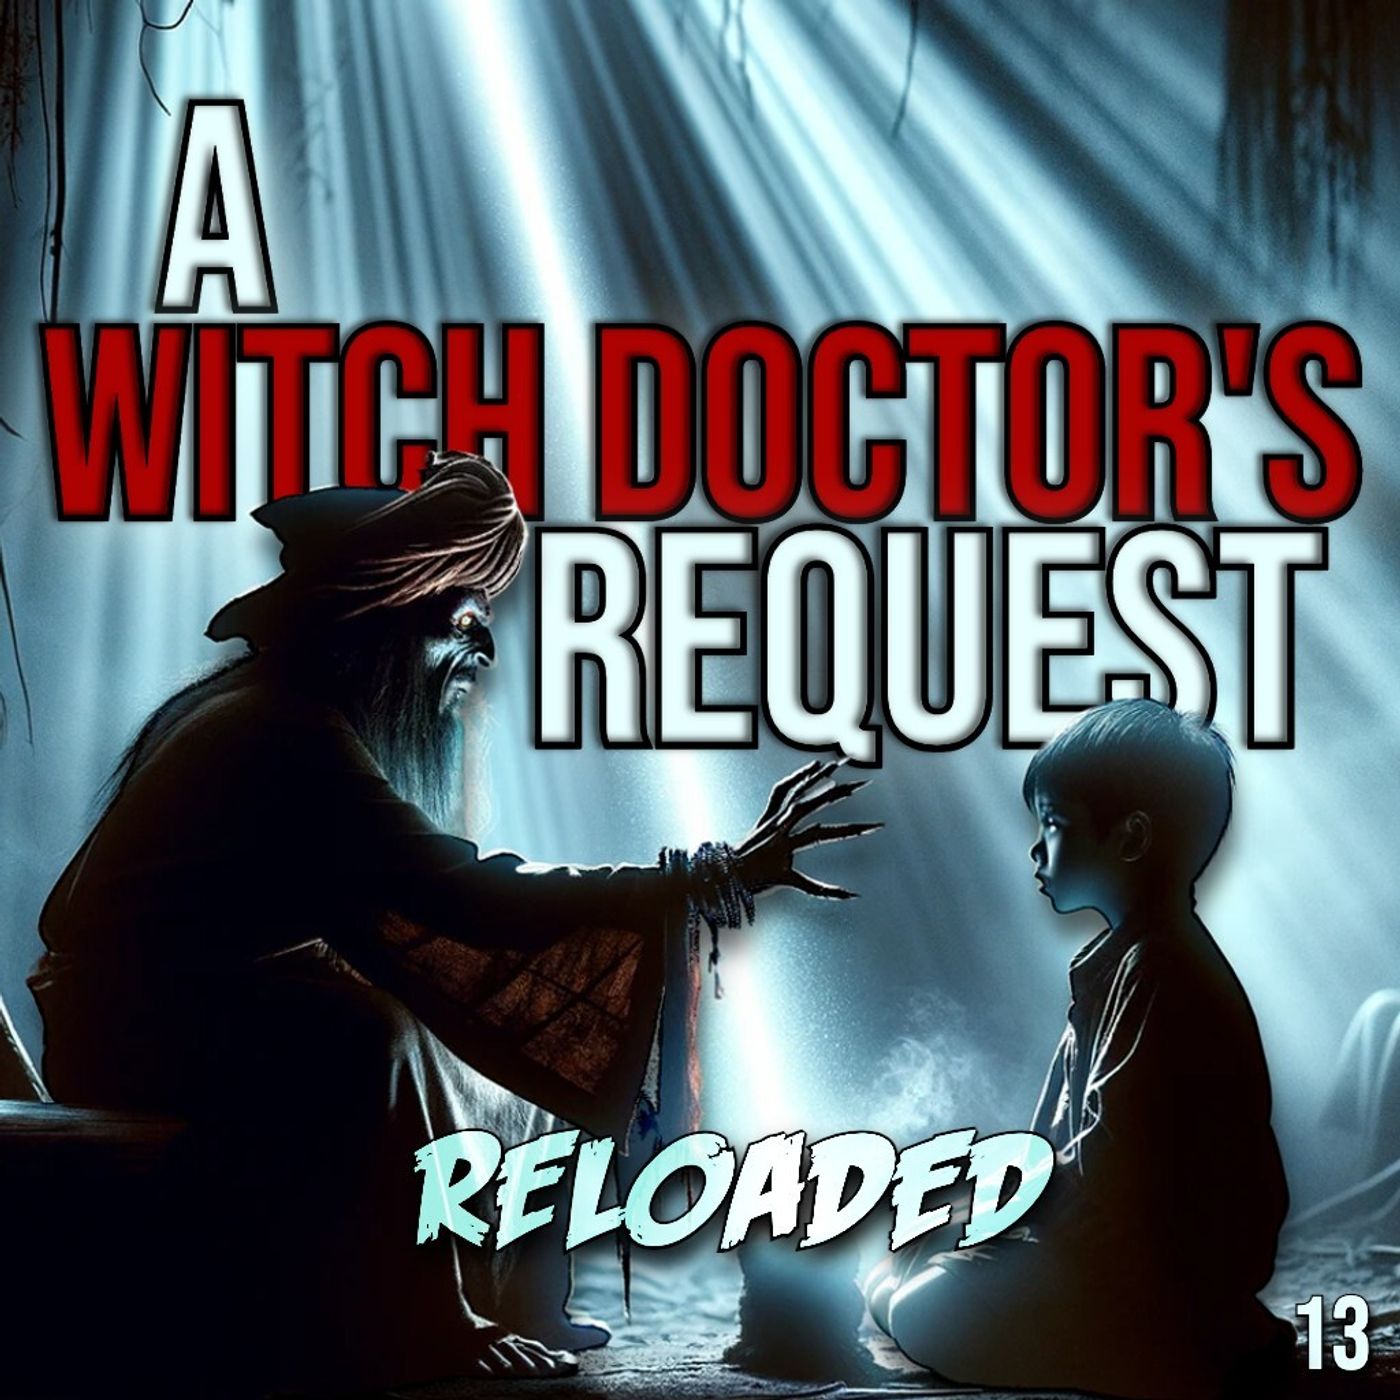 RELOADED | 13: A Witch Doctor's Request